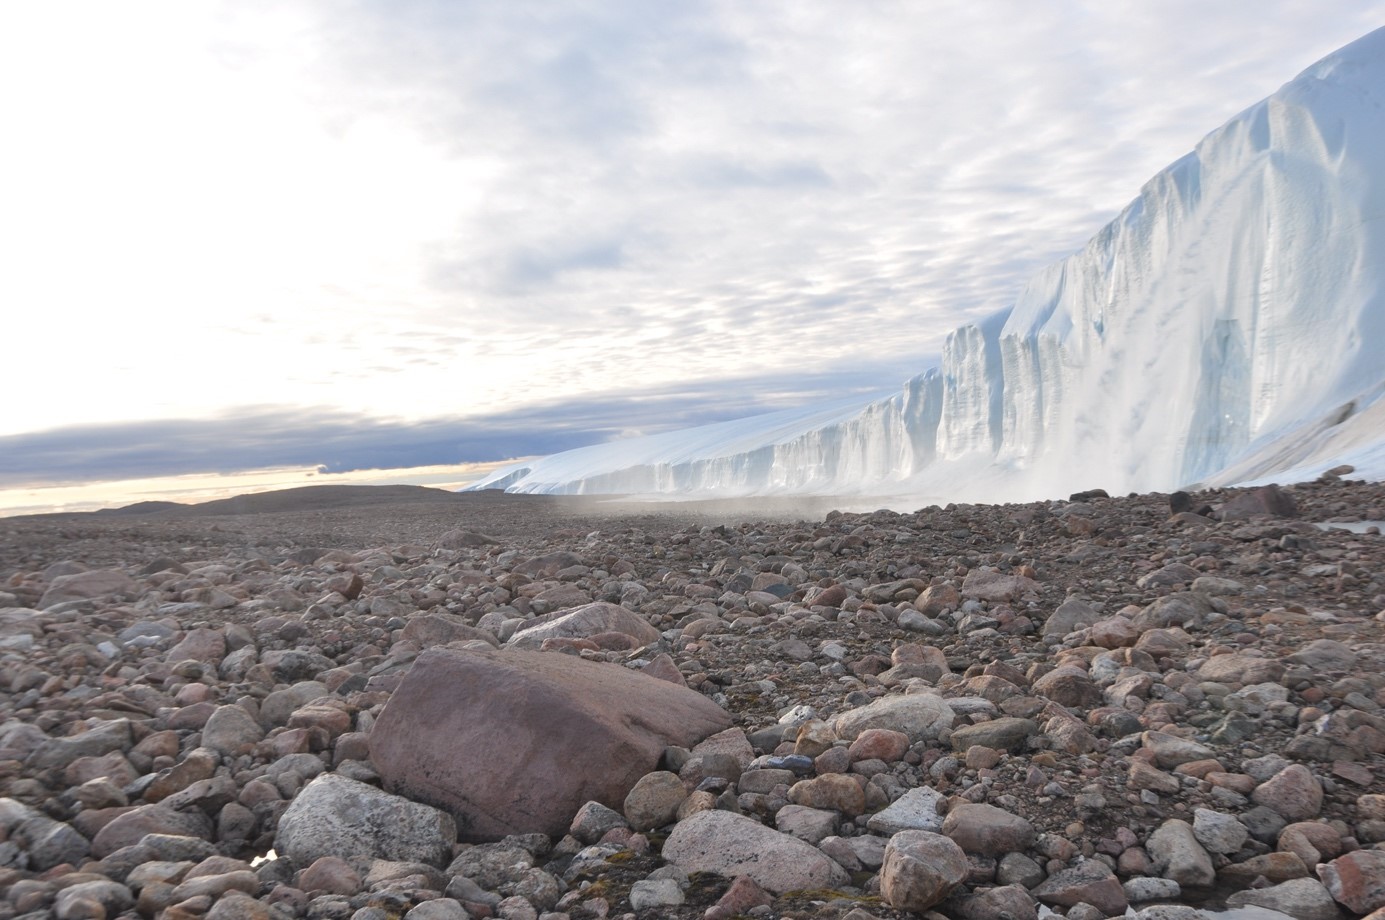 Fig. 5. Photo from fieldwork at the edge of the Greenland Ice Sheet in 2019. Photo credit: Joe MacGregor.